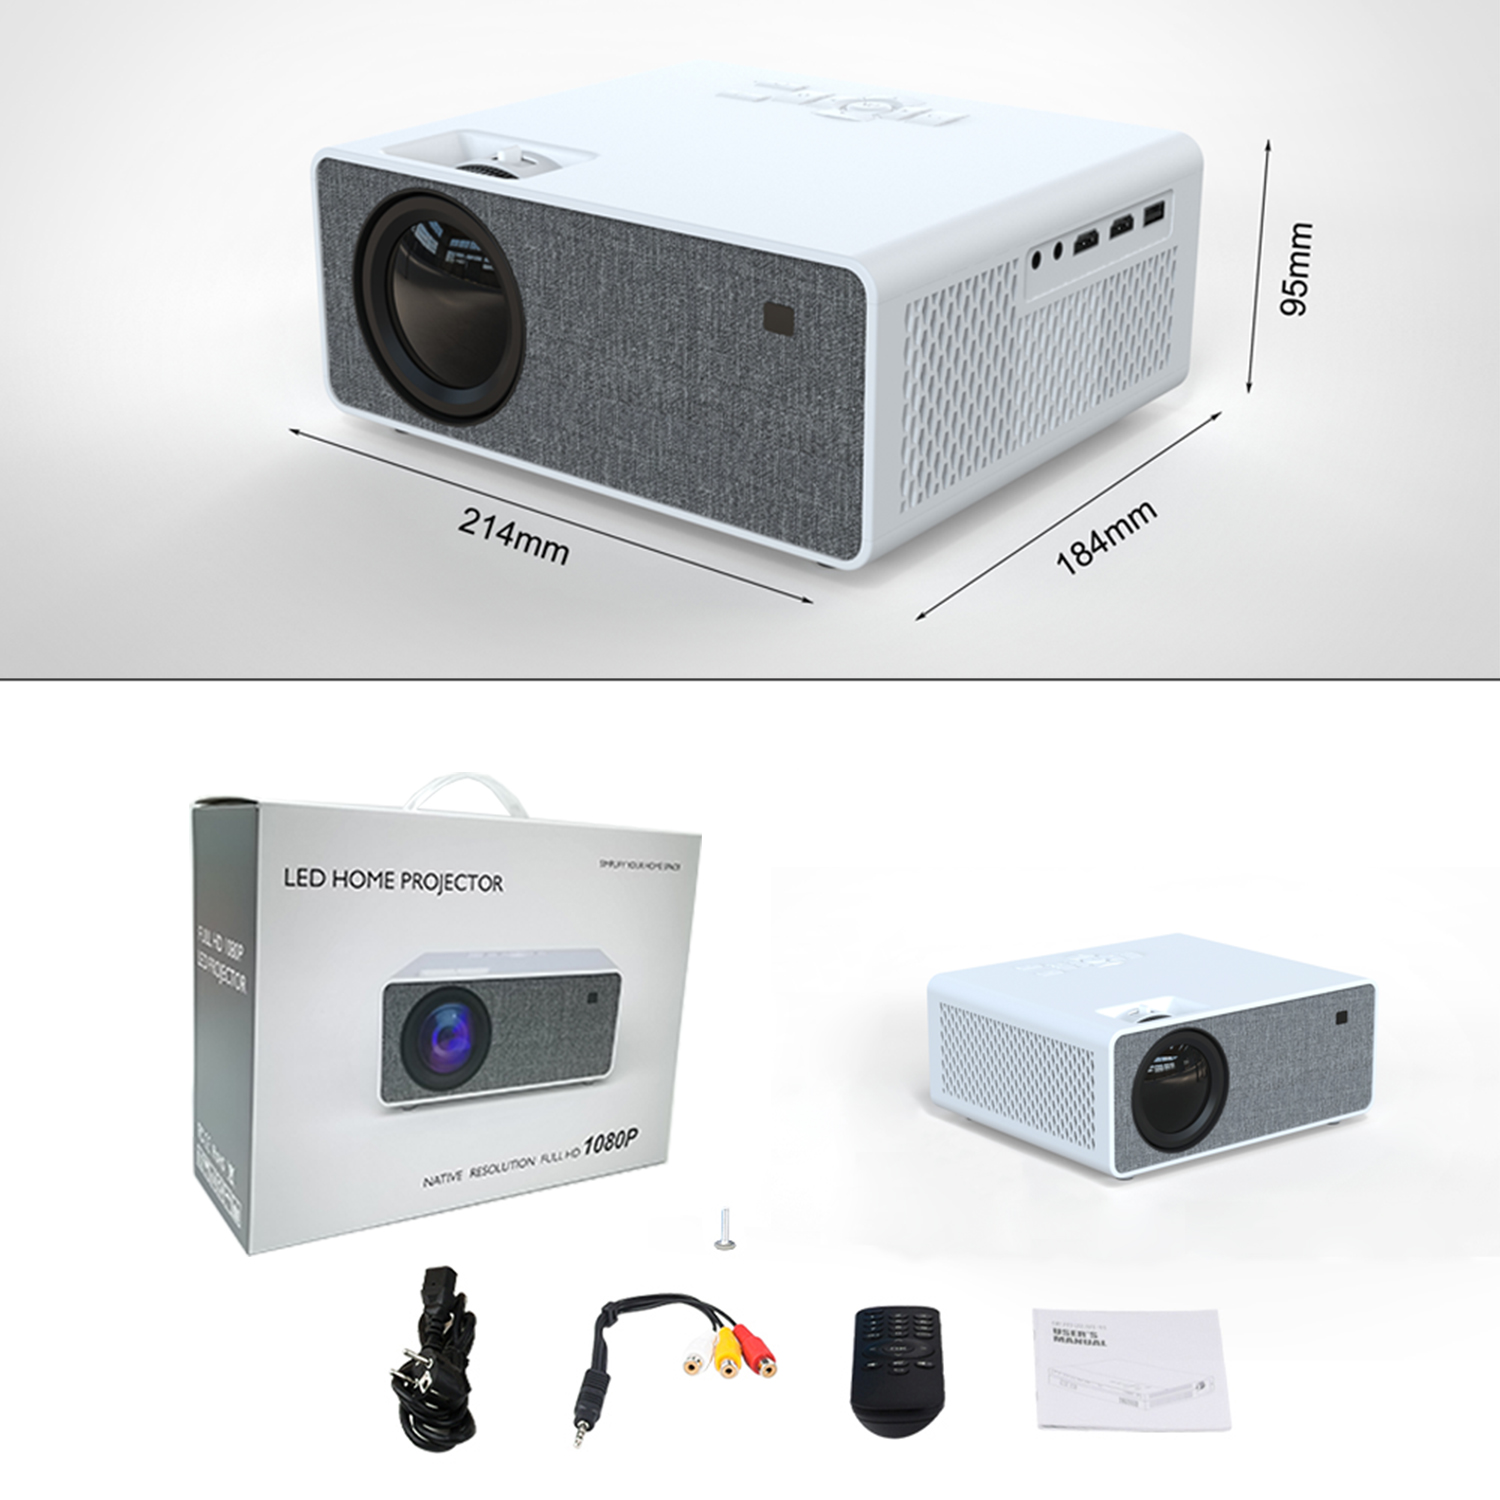 Amazon Hotsale lcd Projector Full HD 1080P Home Theater Projector High Brightness Cost-effective from Shenzhen Divcre Technology Co., Ltd.